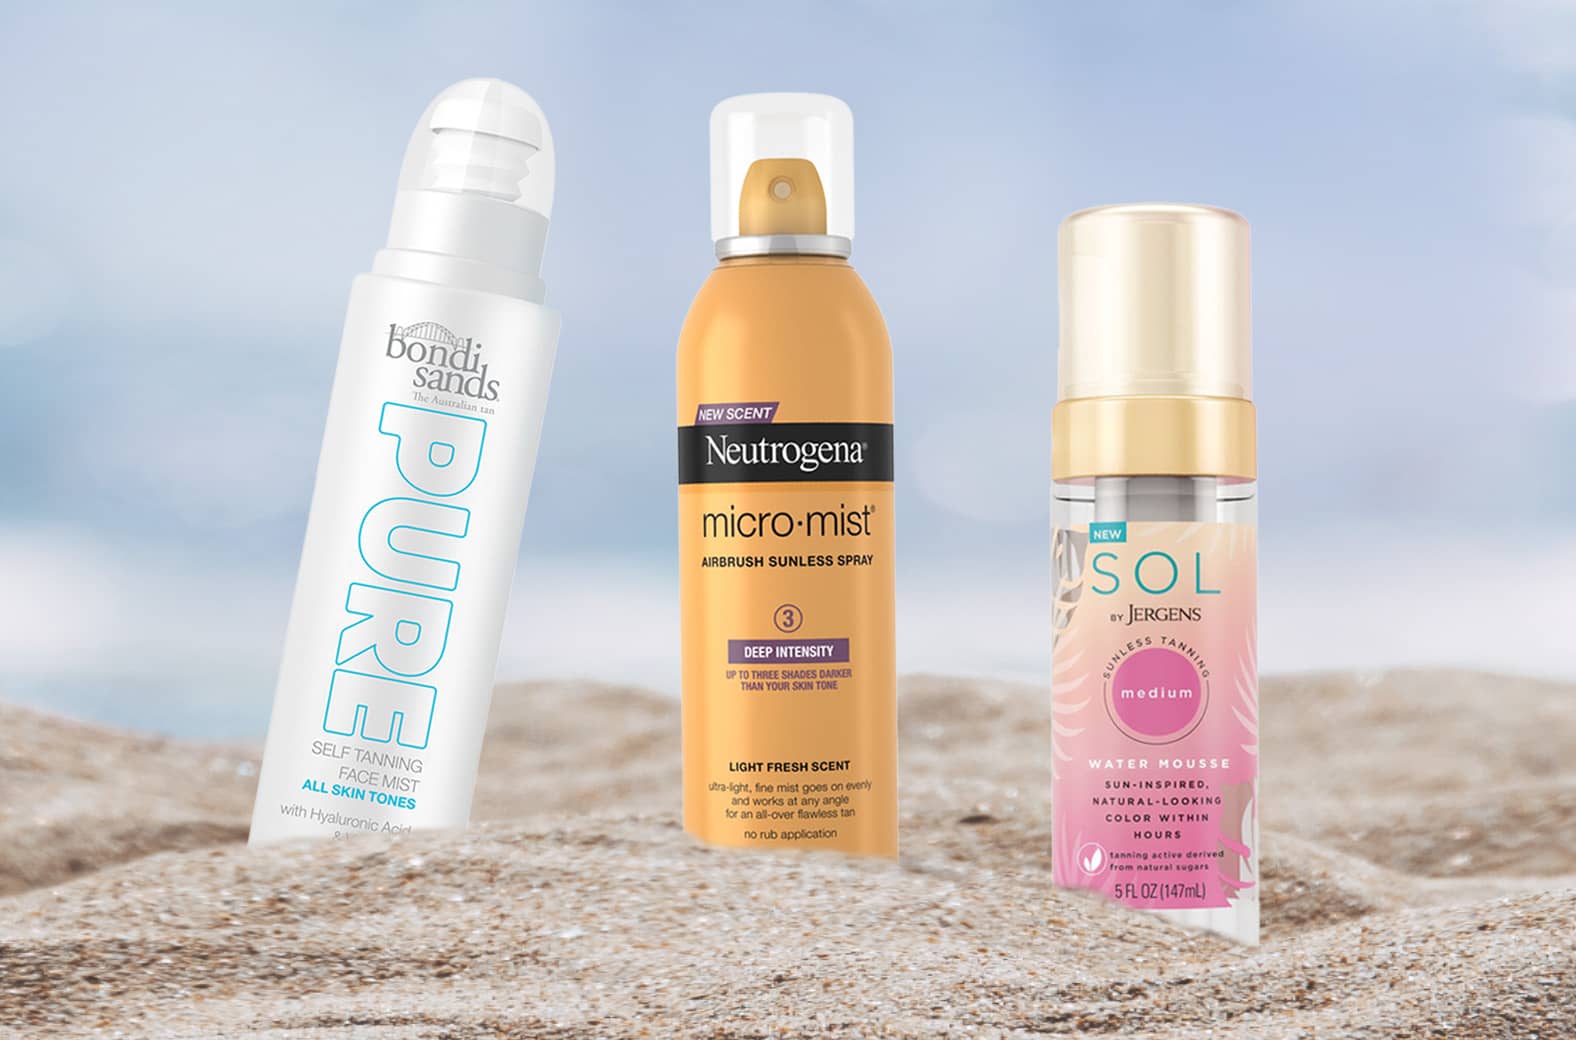 Bondi Sands, Neutrogena and Sol by Jergens self-tanning products